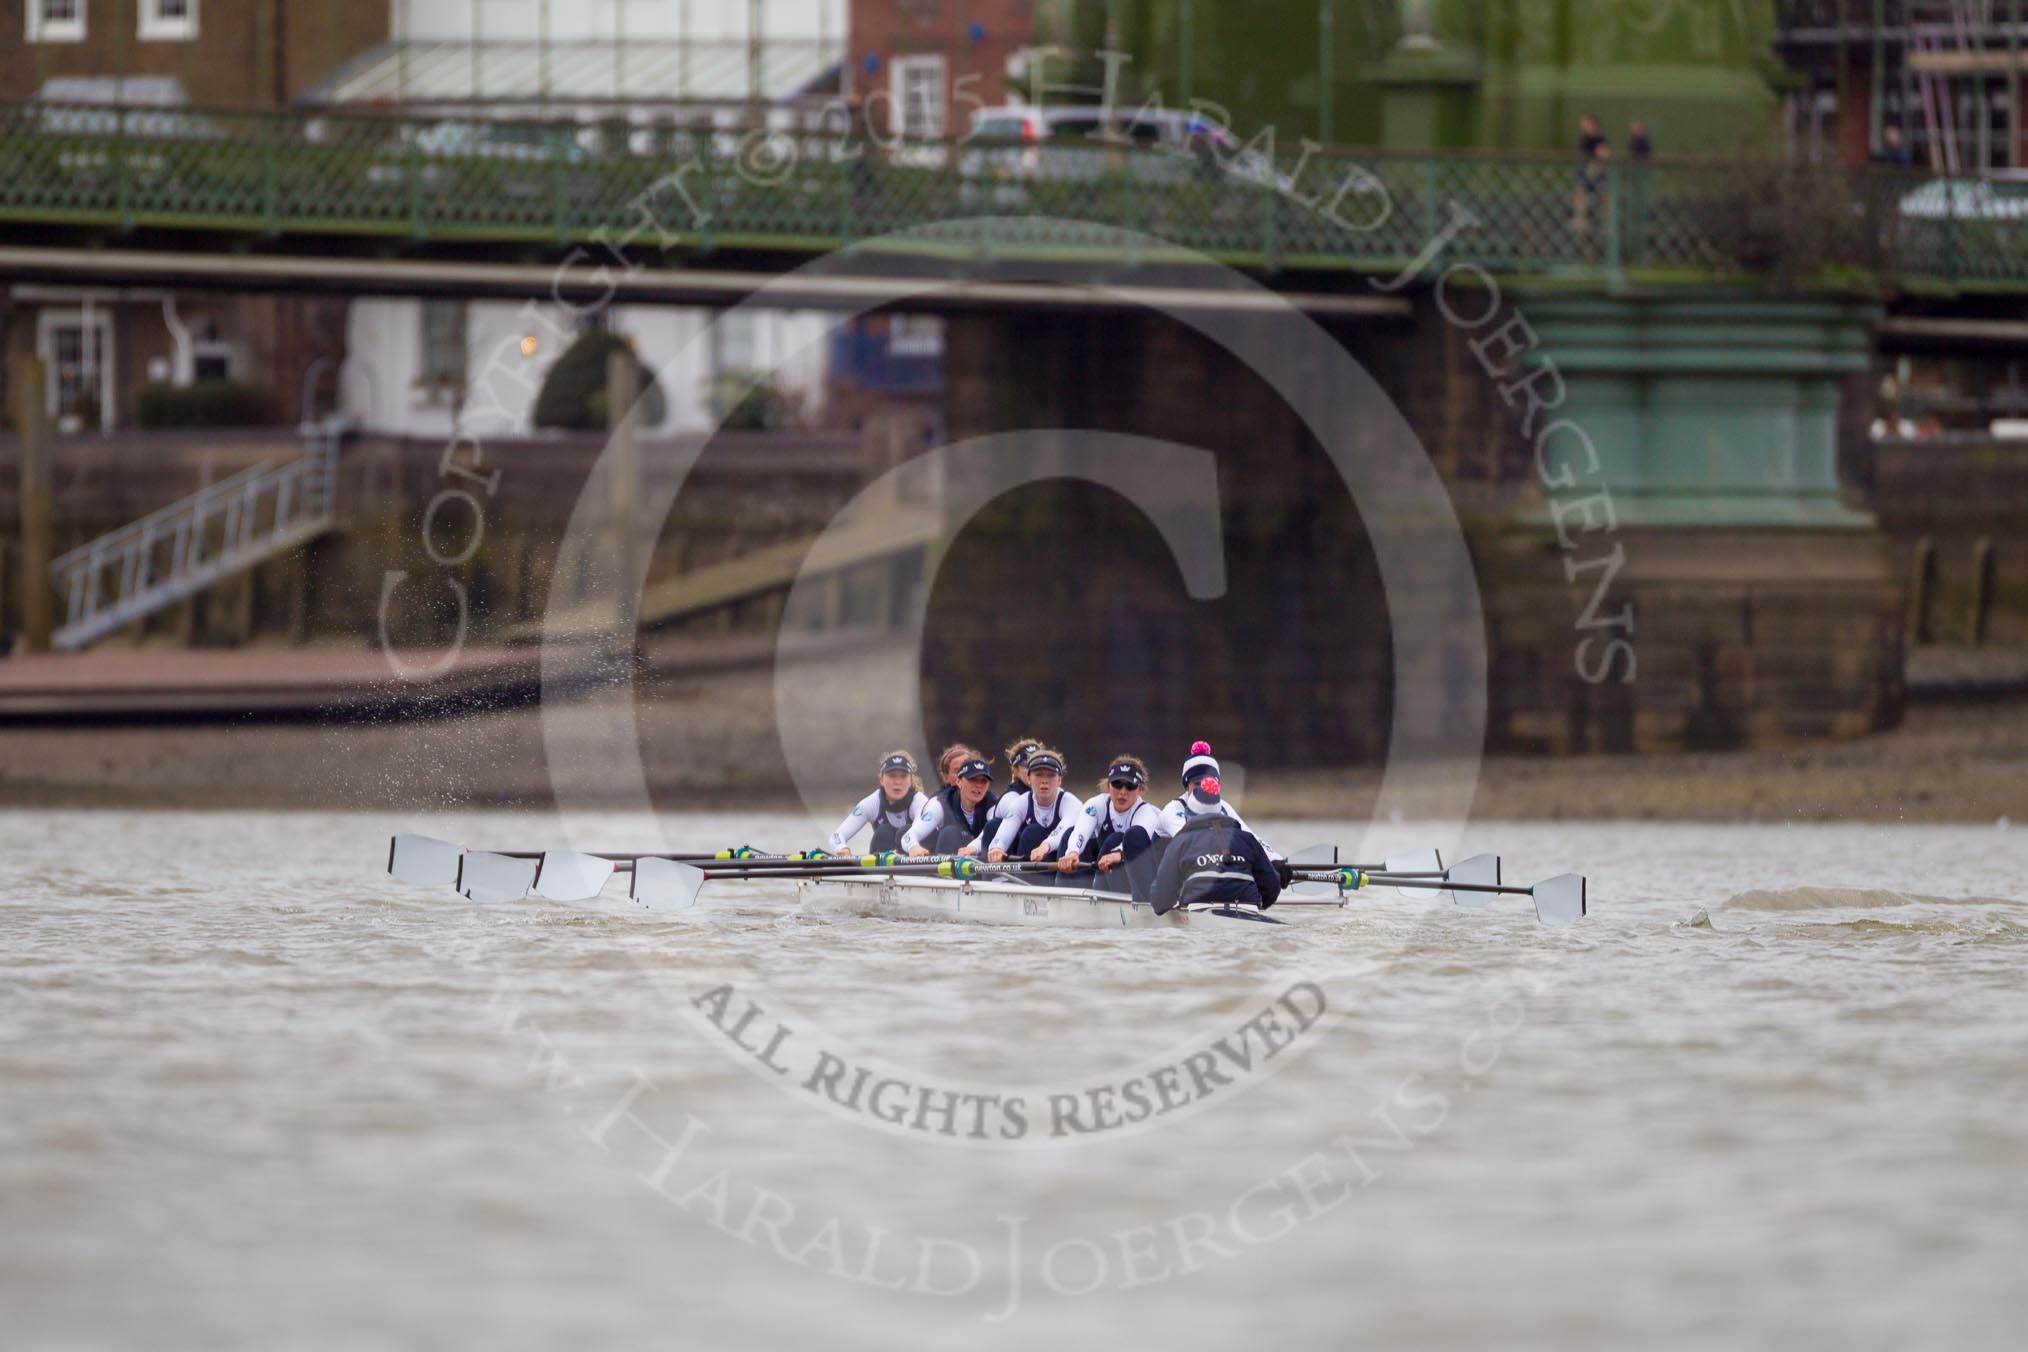 OUWBC approaching Hammersmith Bridge, the finish of the first of the three races over the tideway course